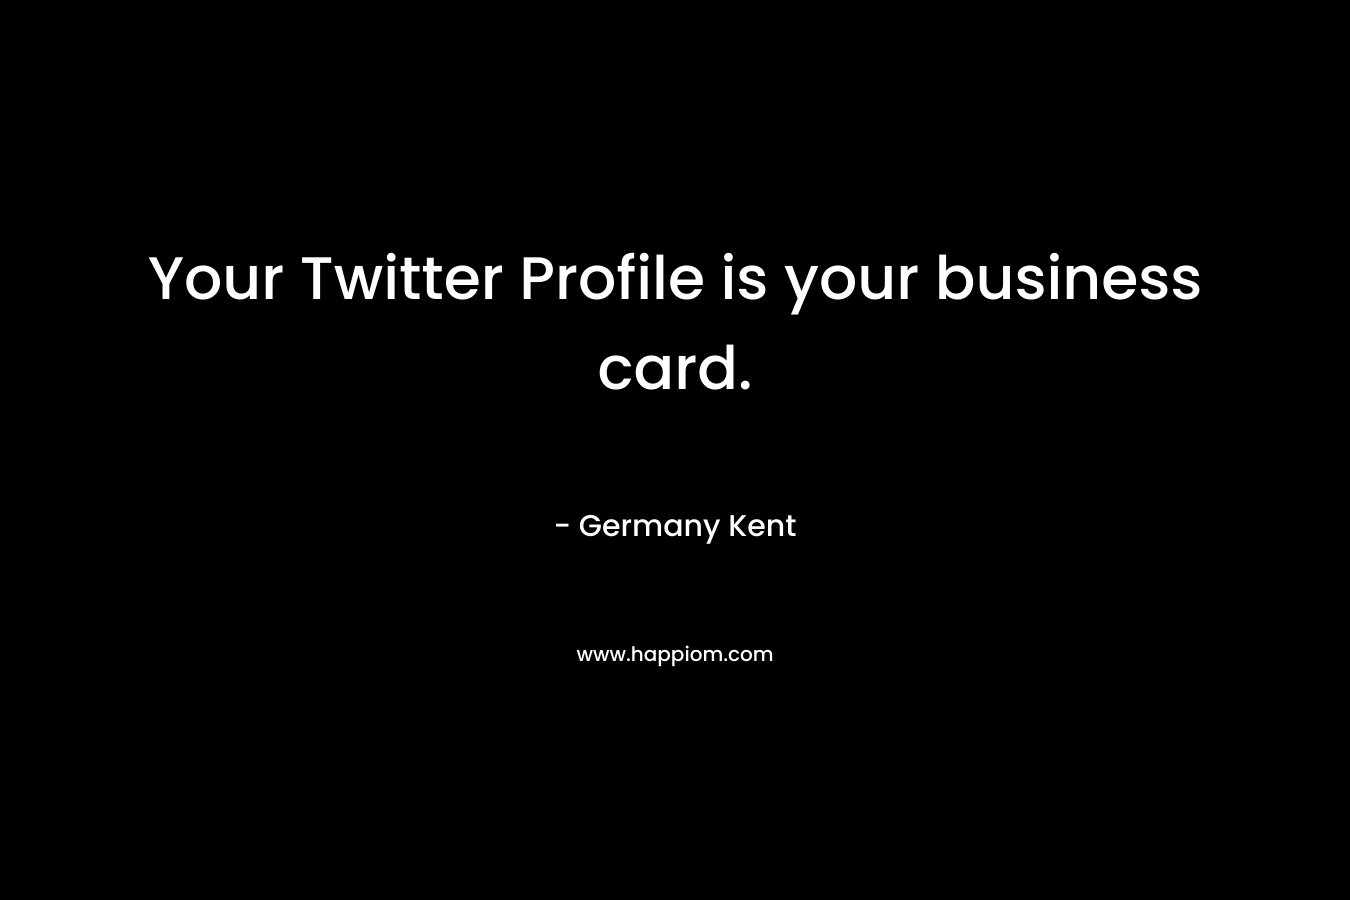 Your Twitter Profile is your business card. – Germany Kent